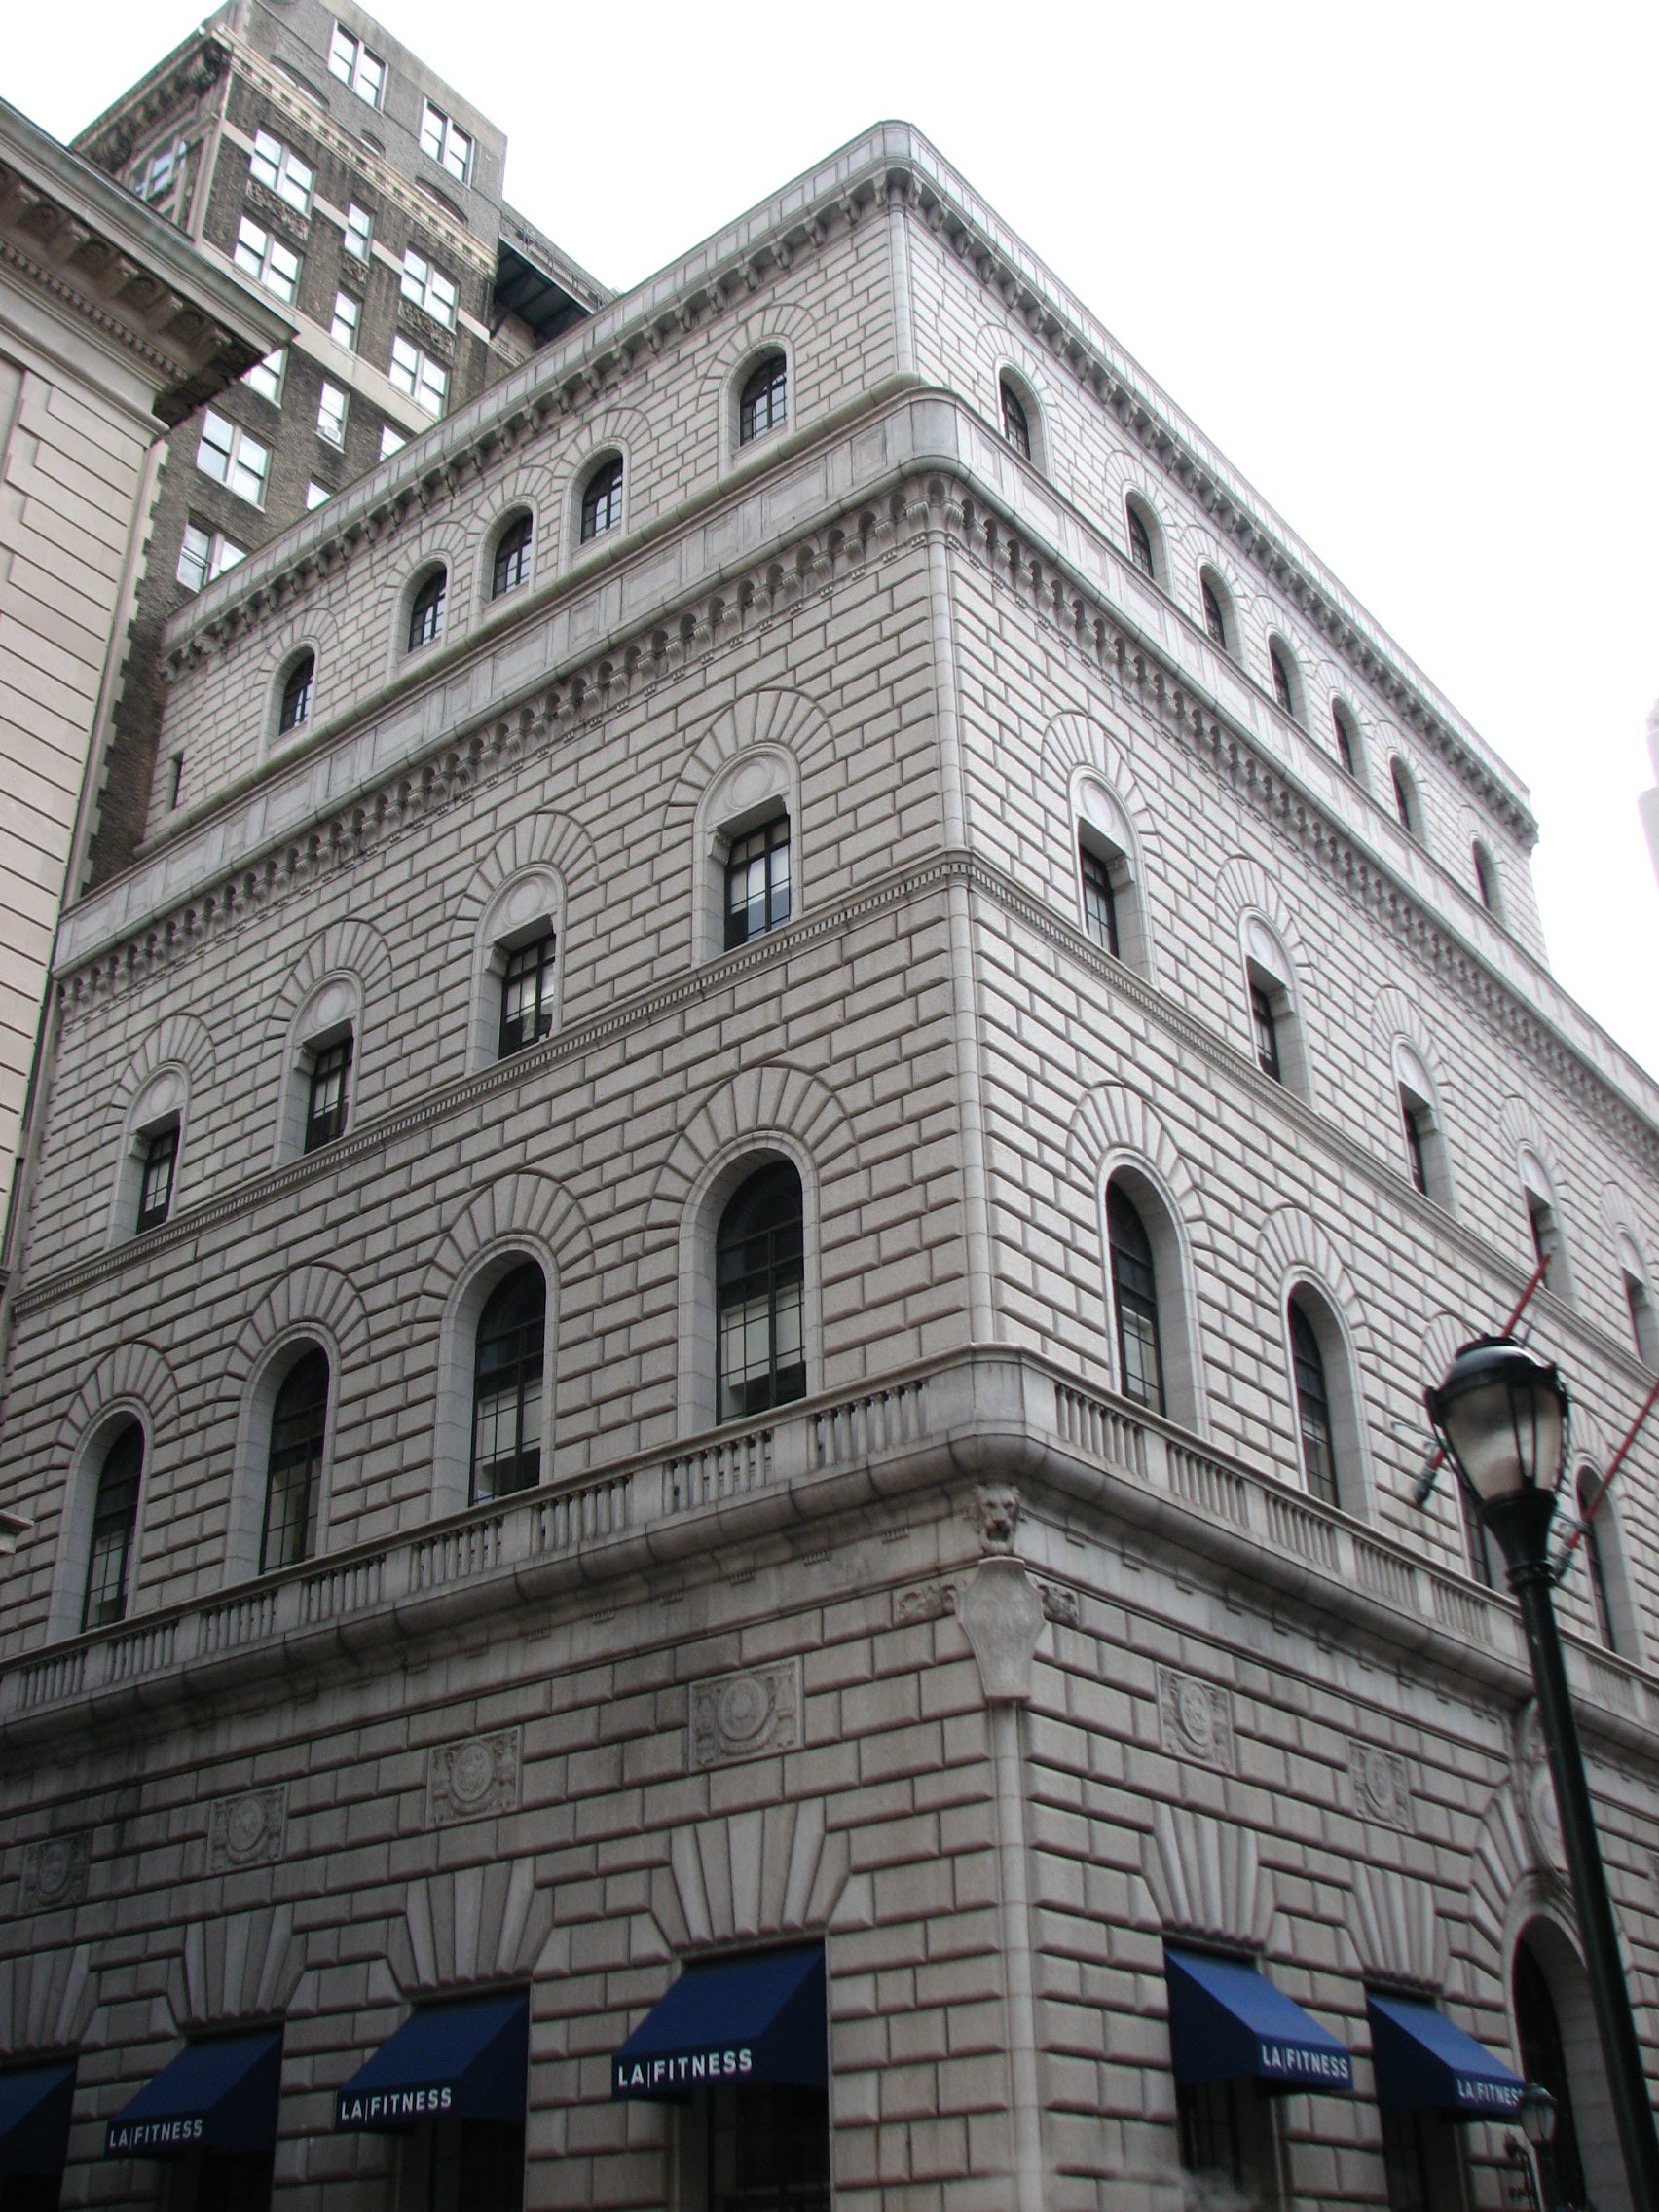 The northeast view of the Drexel & Company Building at 15th and Walnut Streets.